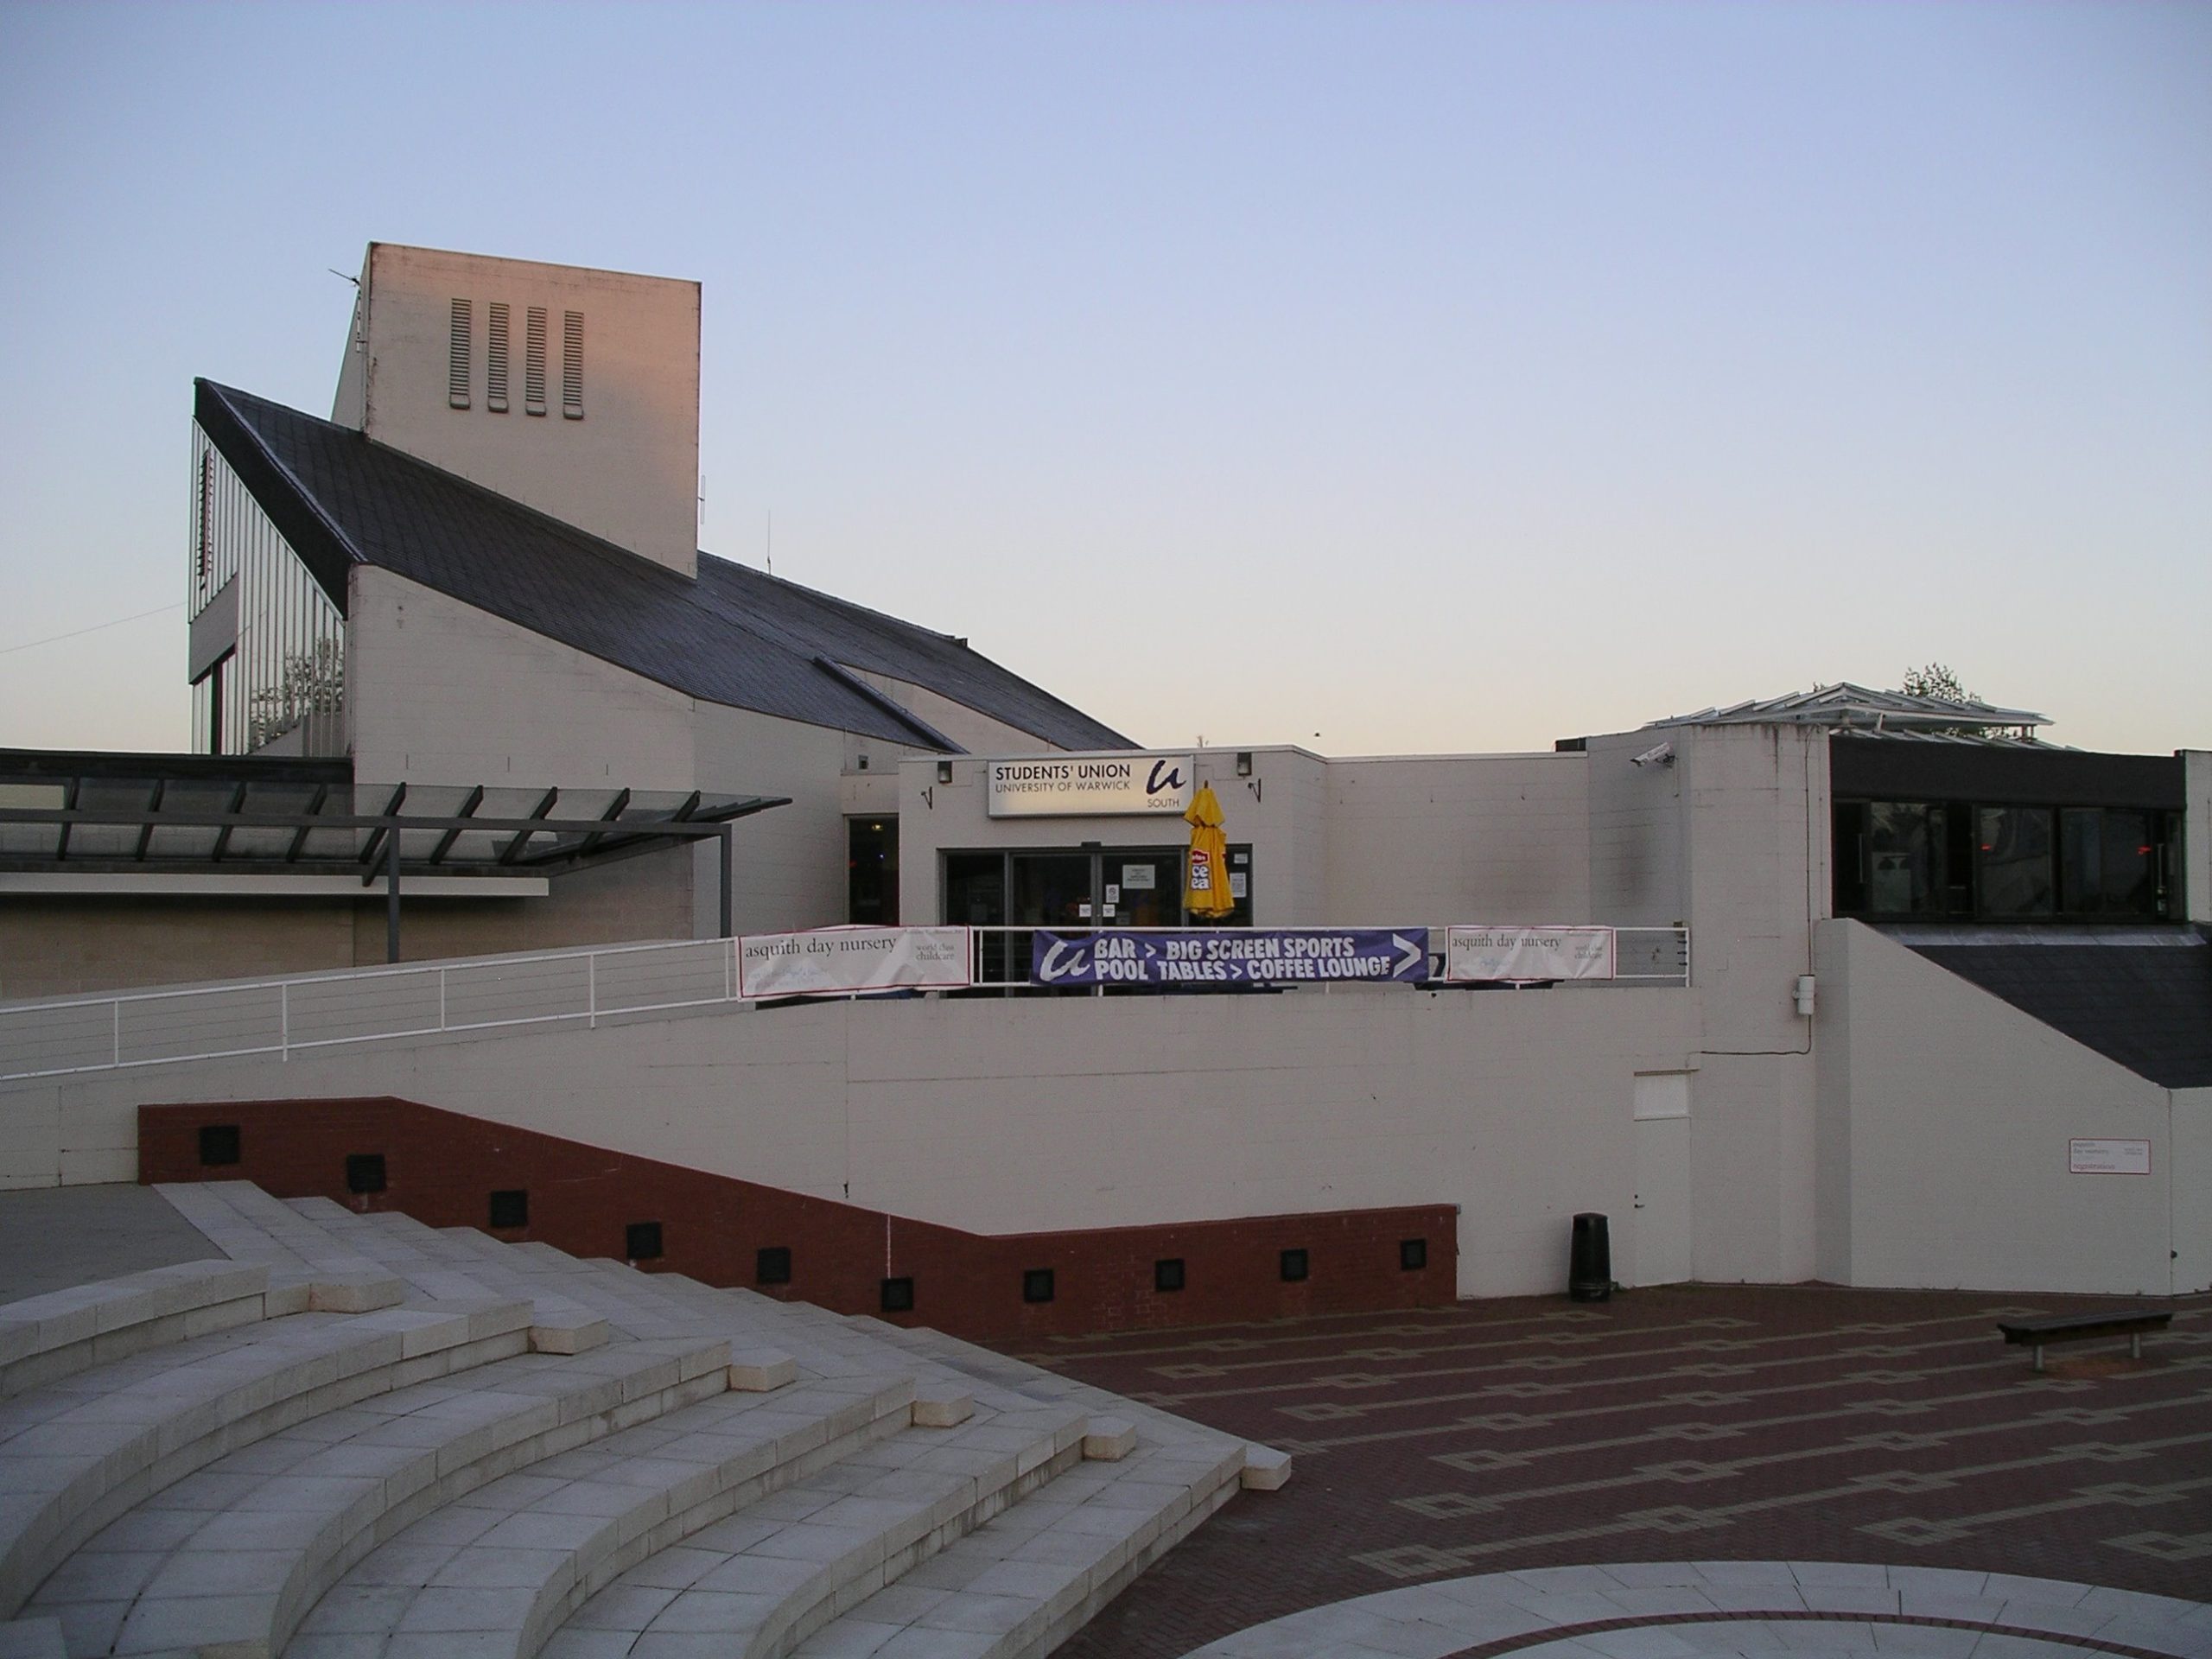 A photo of the Student's Union at Warwick University campus.